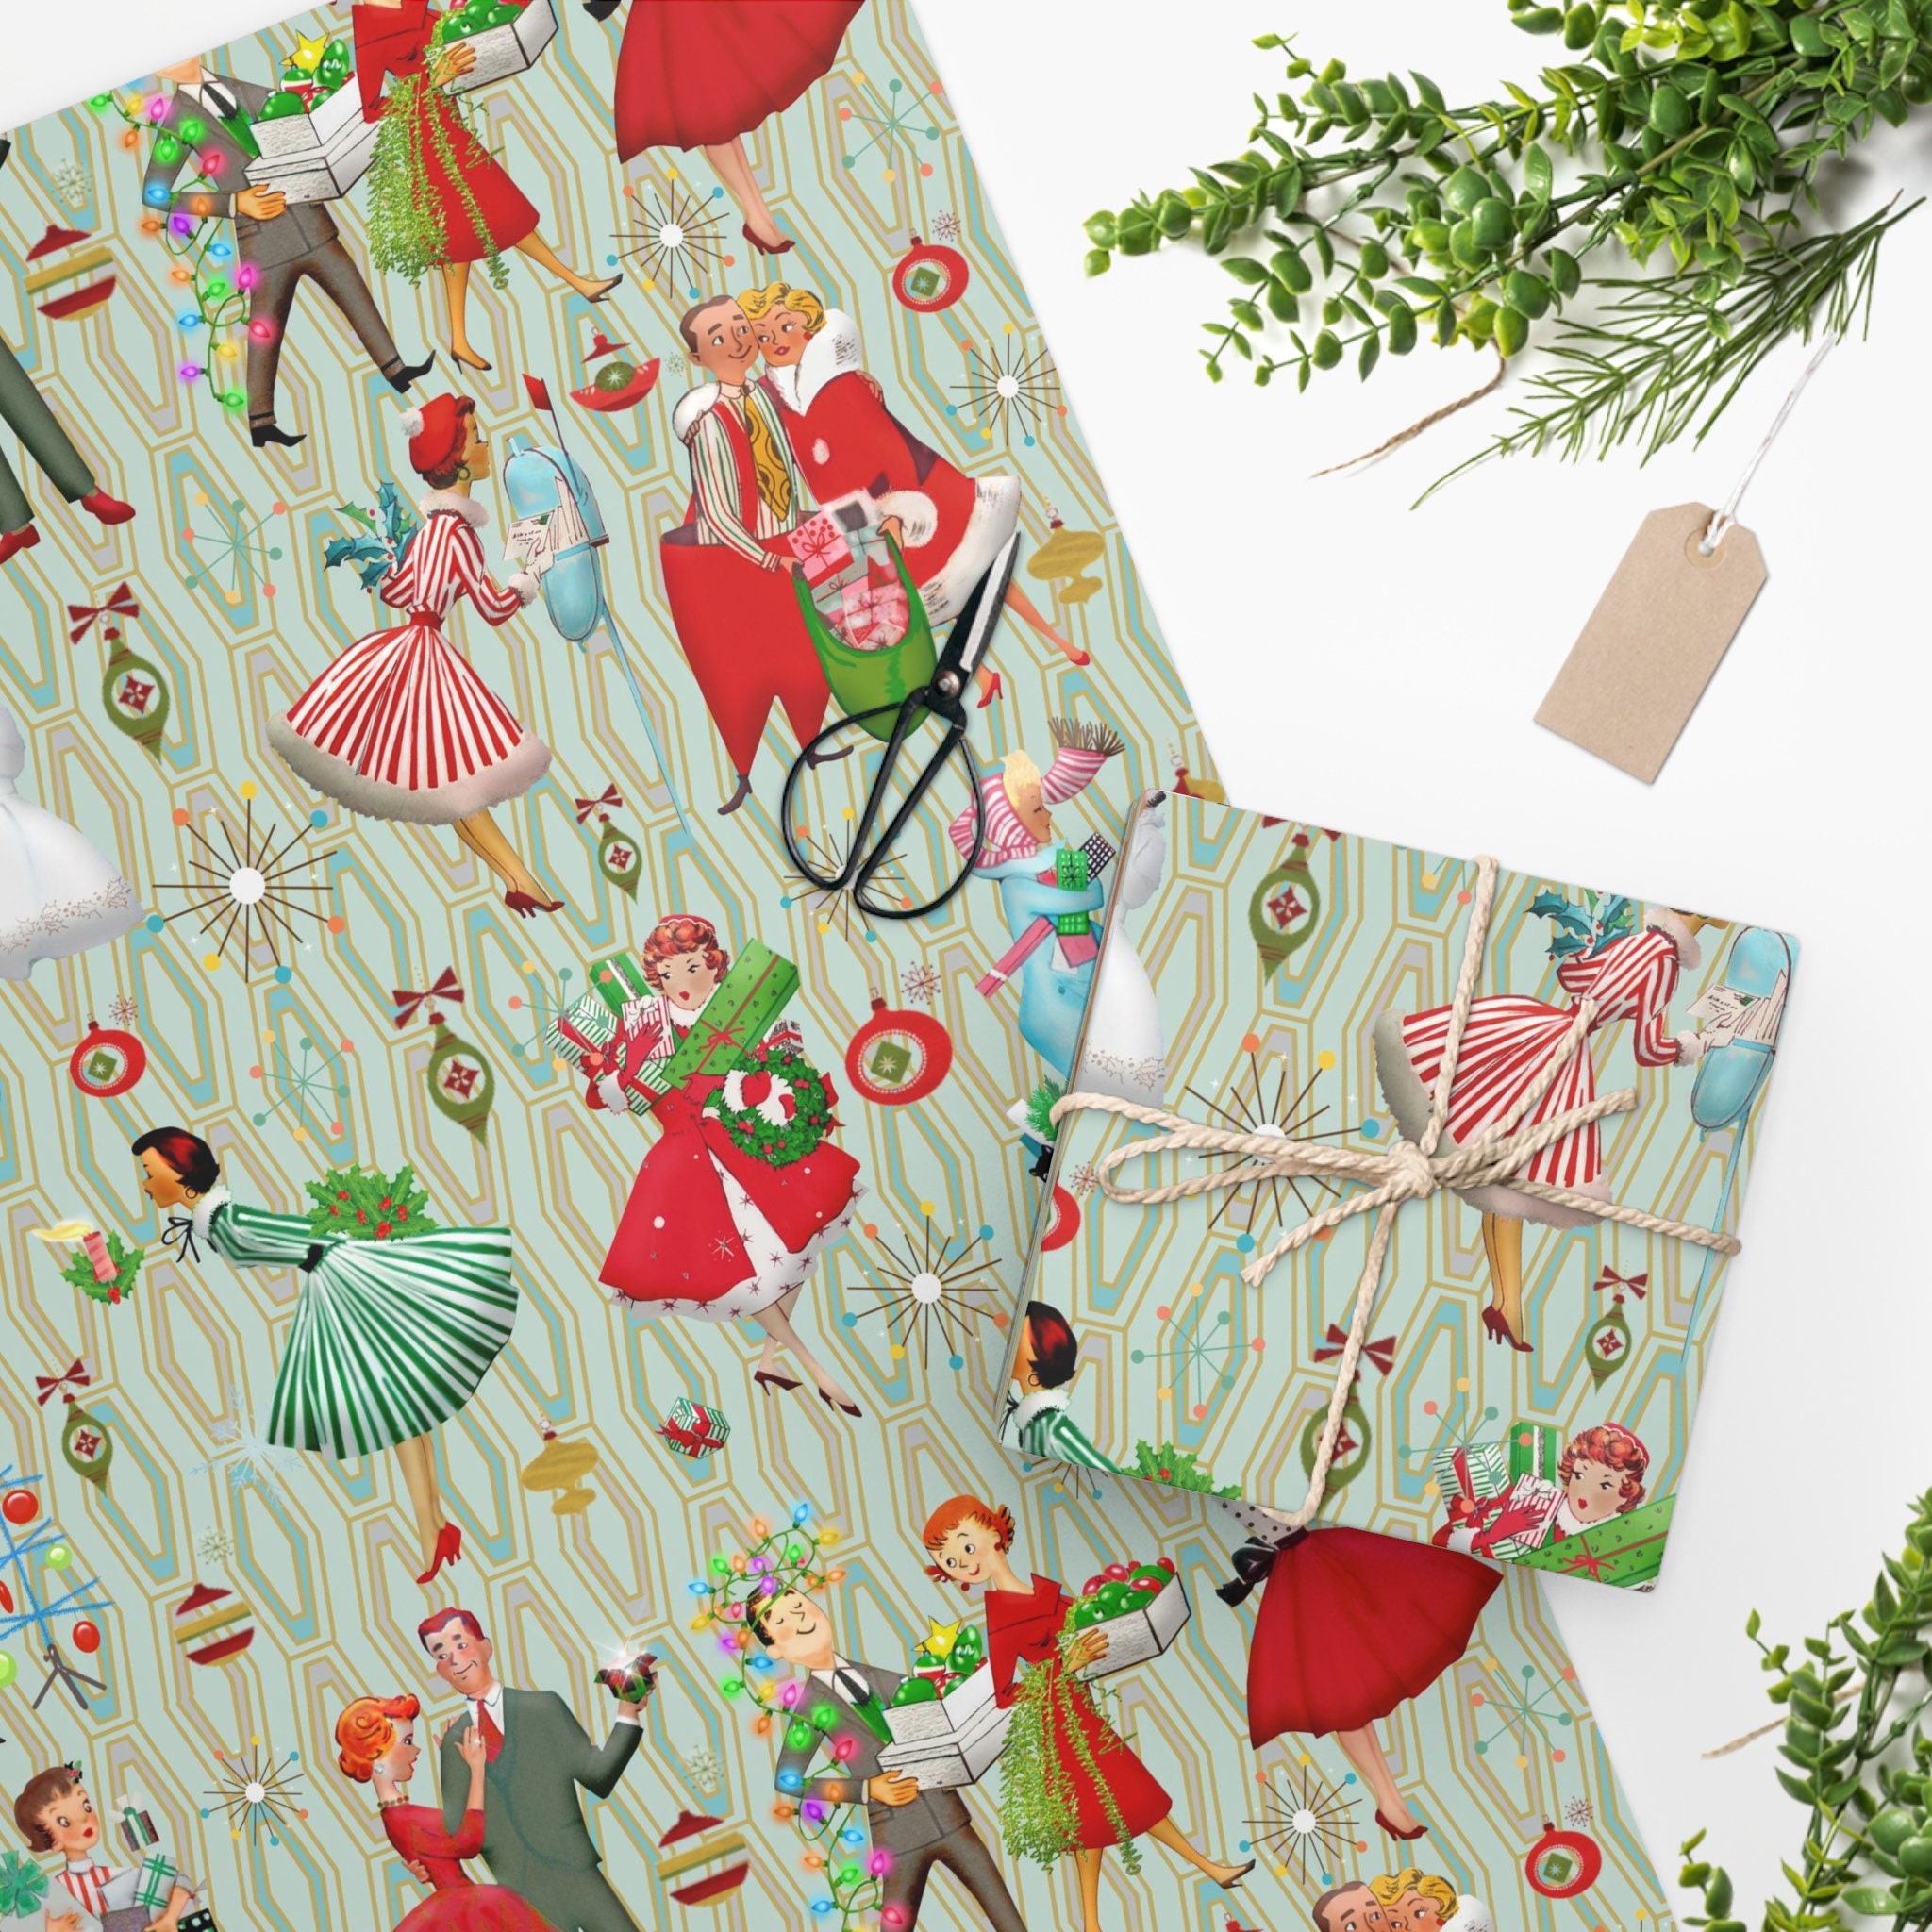 1950s Woman Vintage Style Christmas Wrapping Paper, Traditional Classic  Holiday Decor, Retro Antique Look Gift Wrap (One 20 inch x 30 inch sheet)